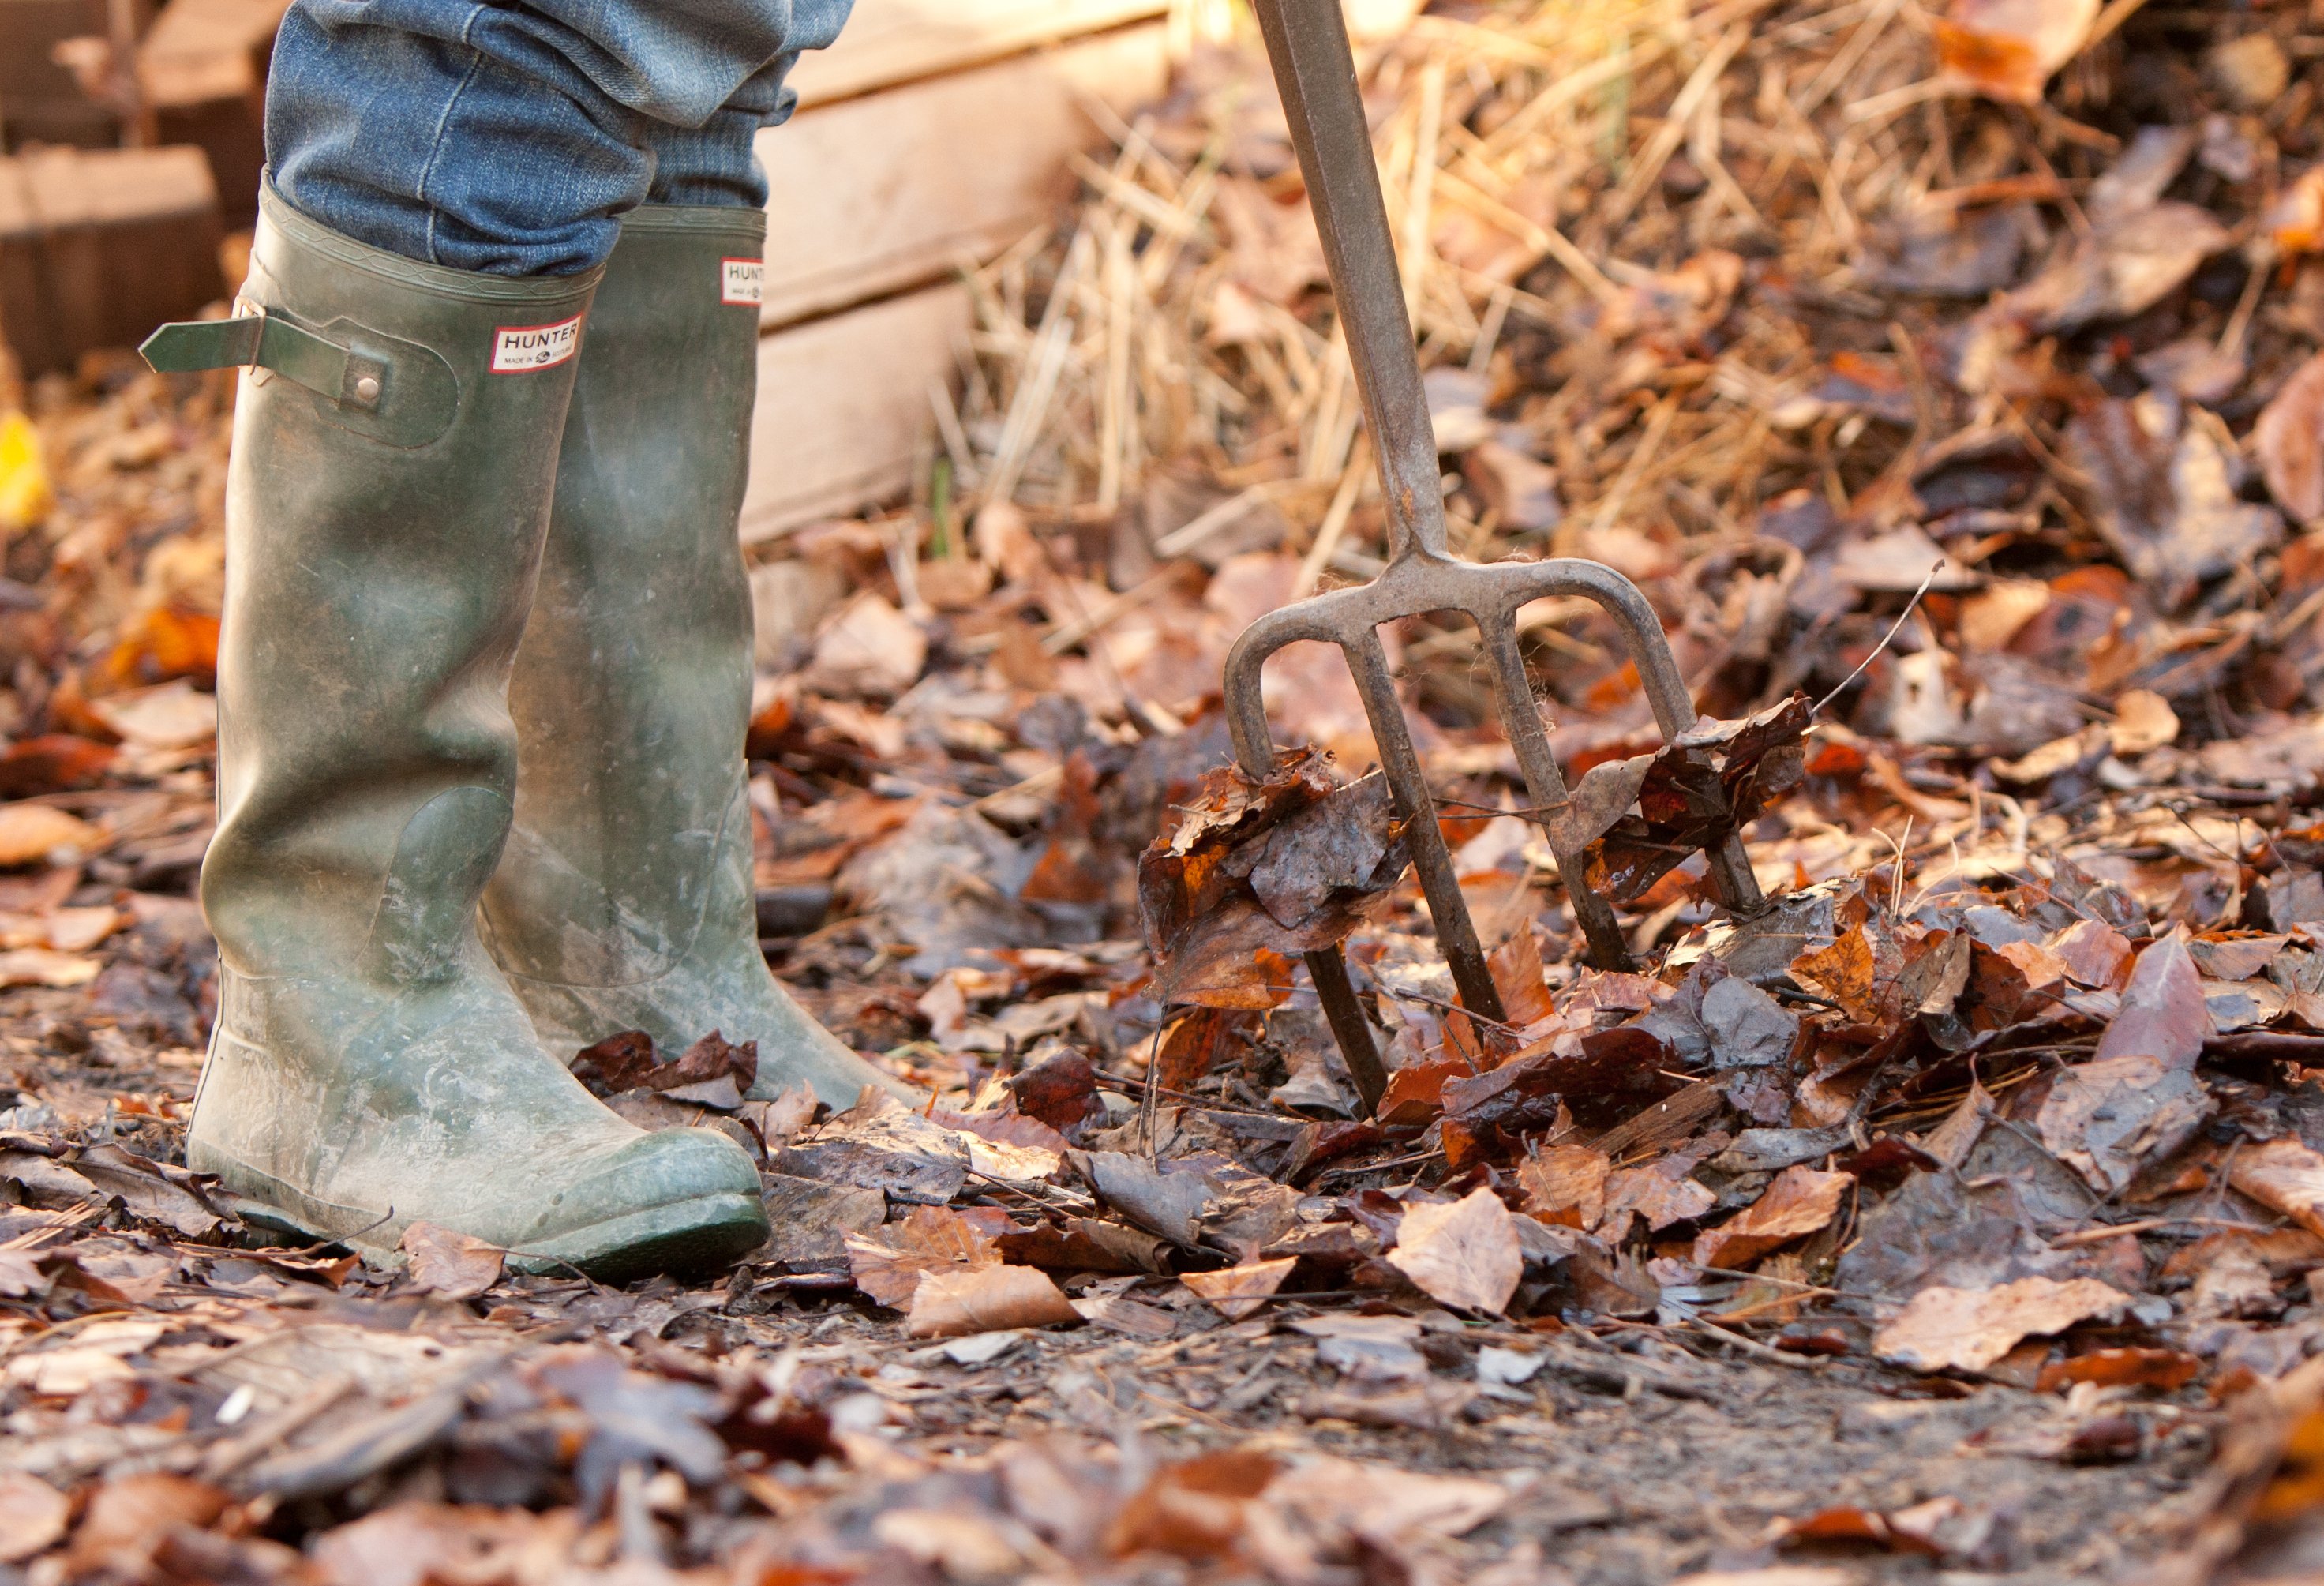 Using dried leaves in the garden  Benefits of mulching with dried leaves 